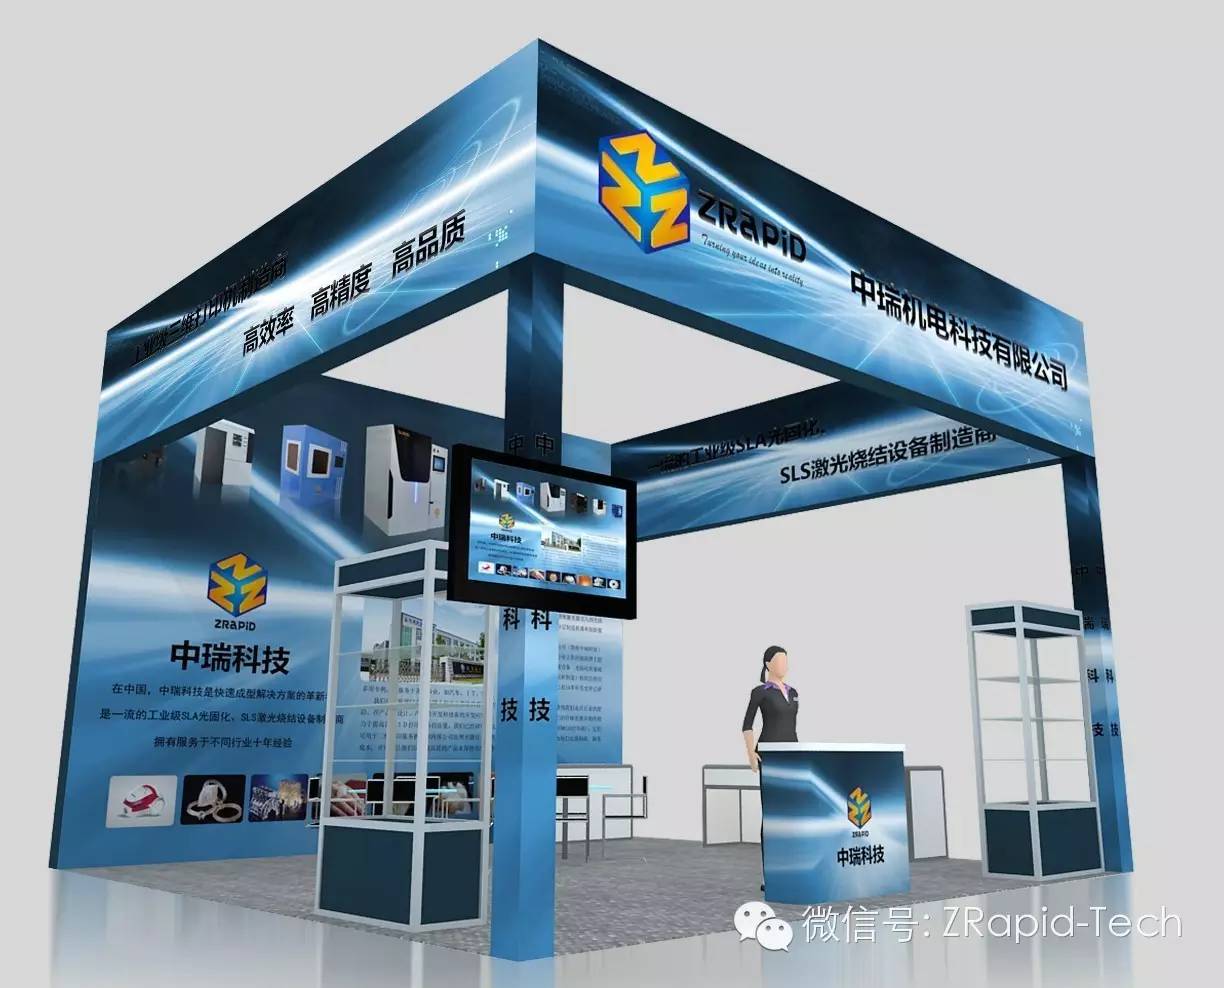 【exhibitioninformation】ZRapid will soon participate the 12th China Optics Valley International Optoelectronics Expo 2015